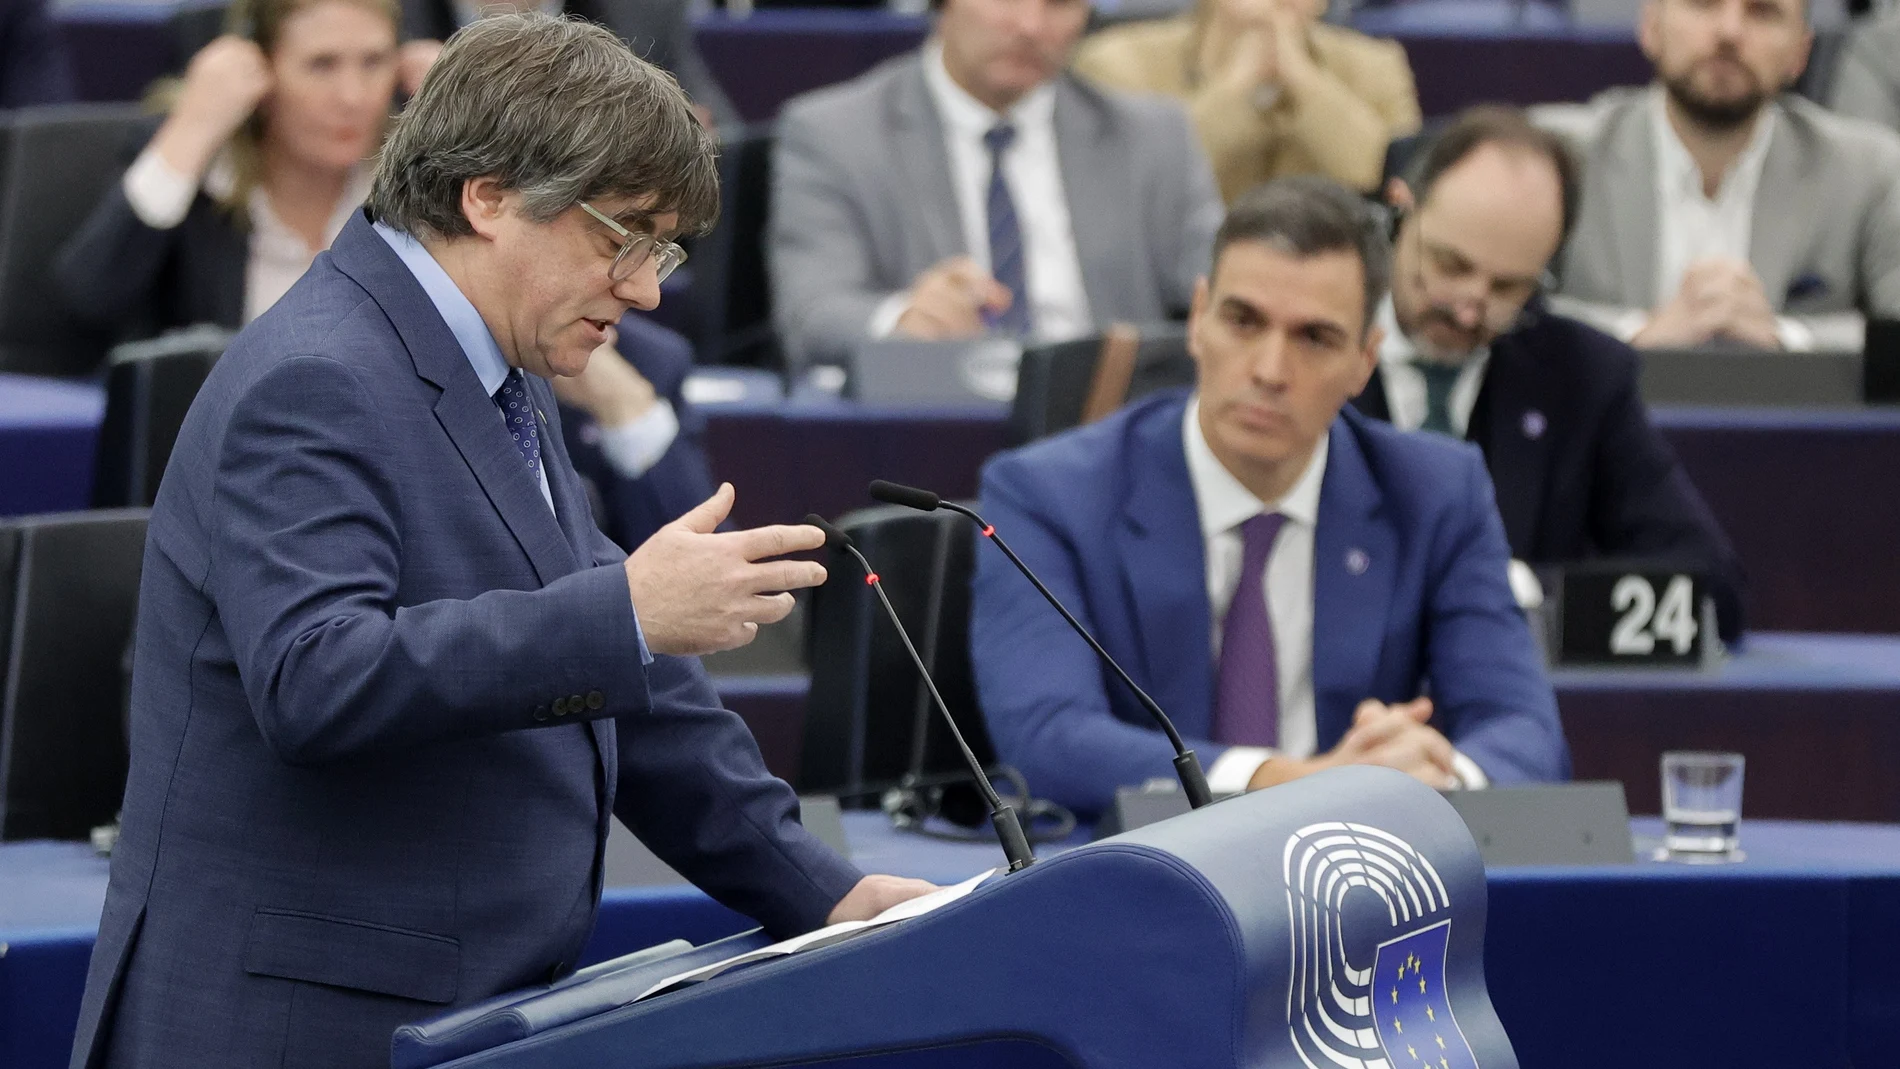 Former Catalan regional premier Carles Puigdemont speaks during a debate on 'Review of the Spanish Presidency of the Council' at the European Parliament in Strasbourg, France, 13 December 2023